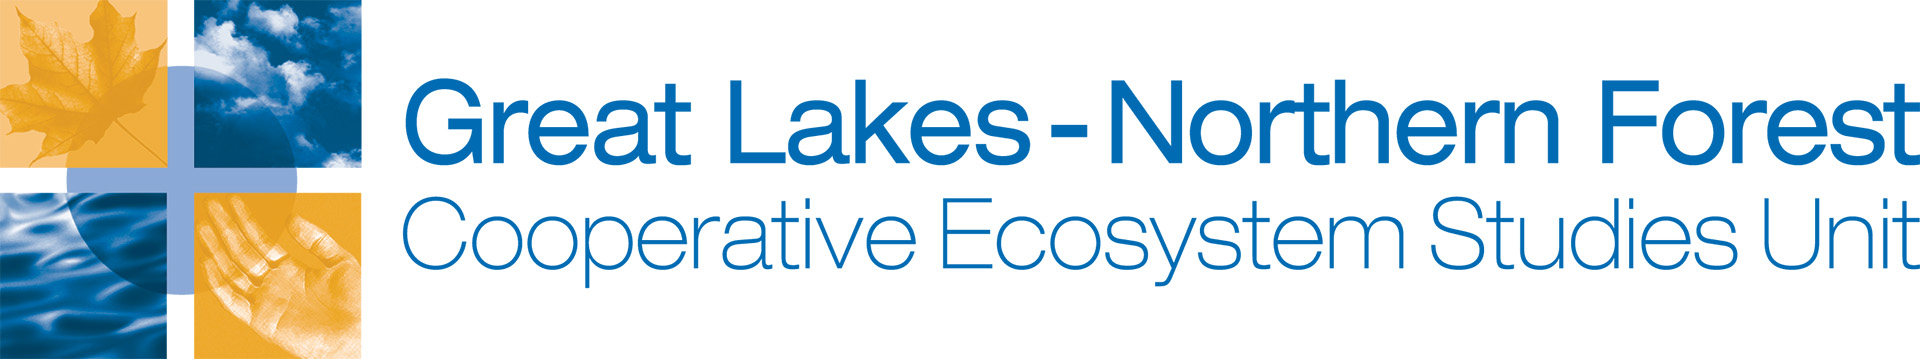 Great Lakes Northern Forest CESU logo